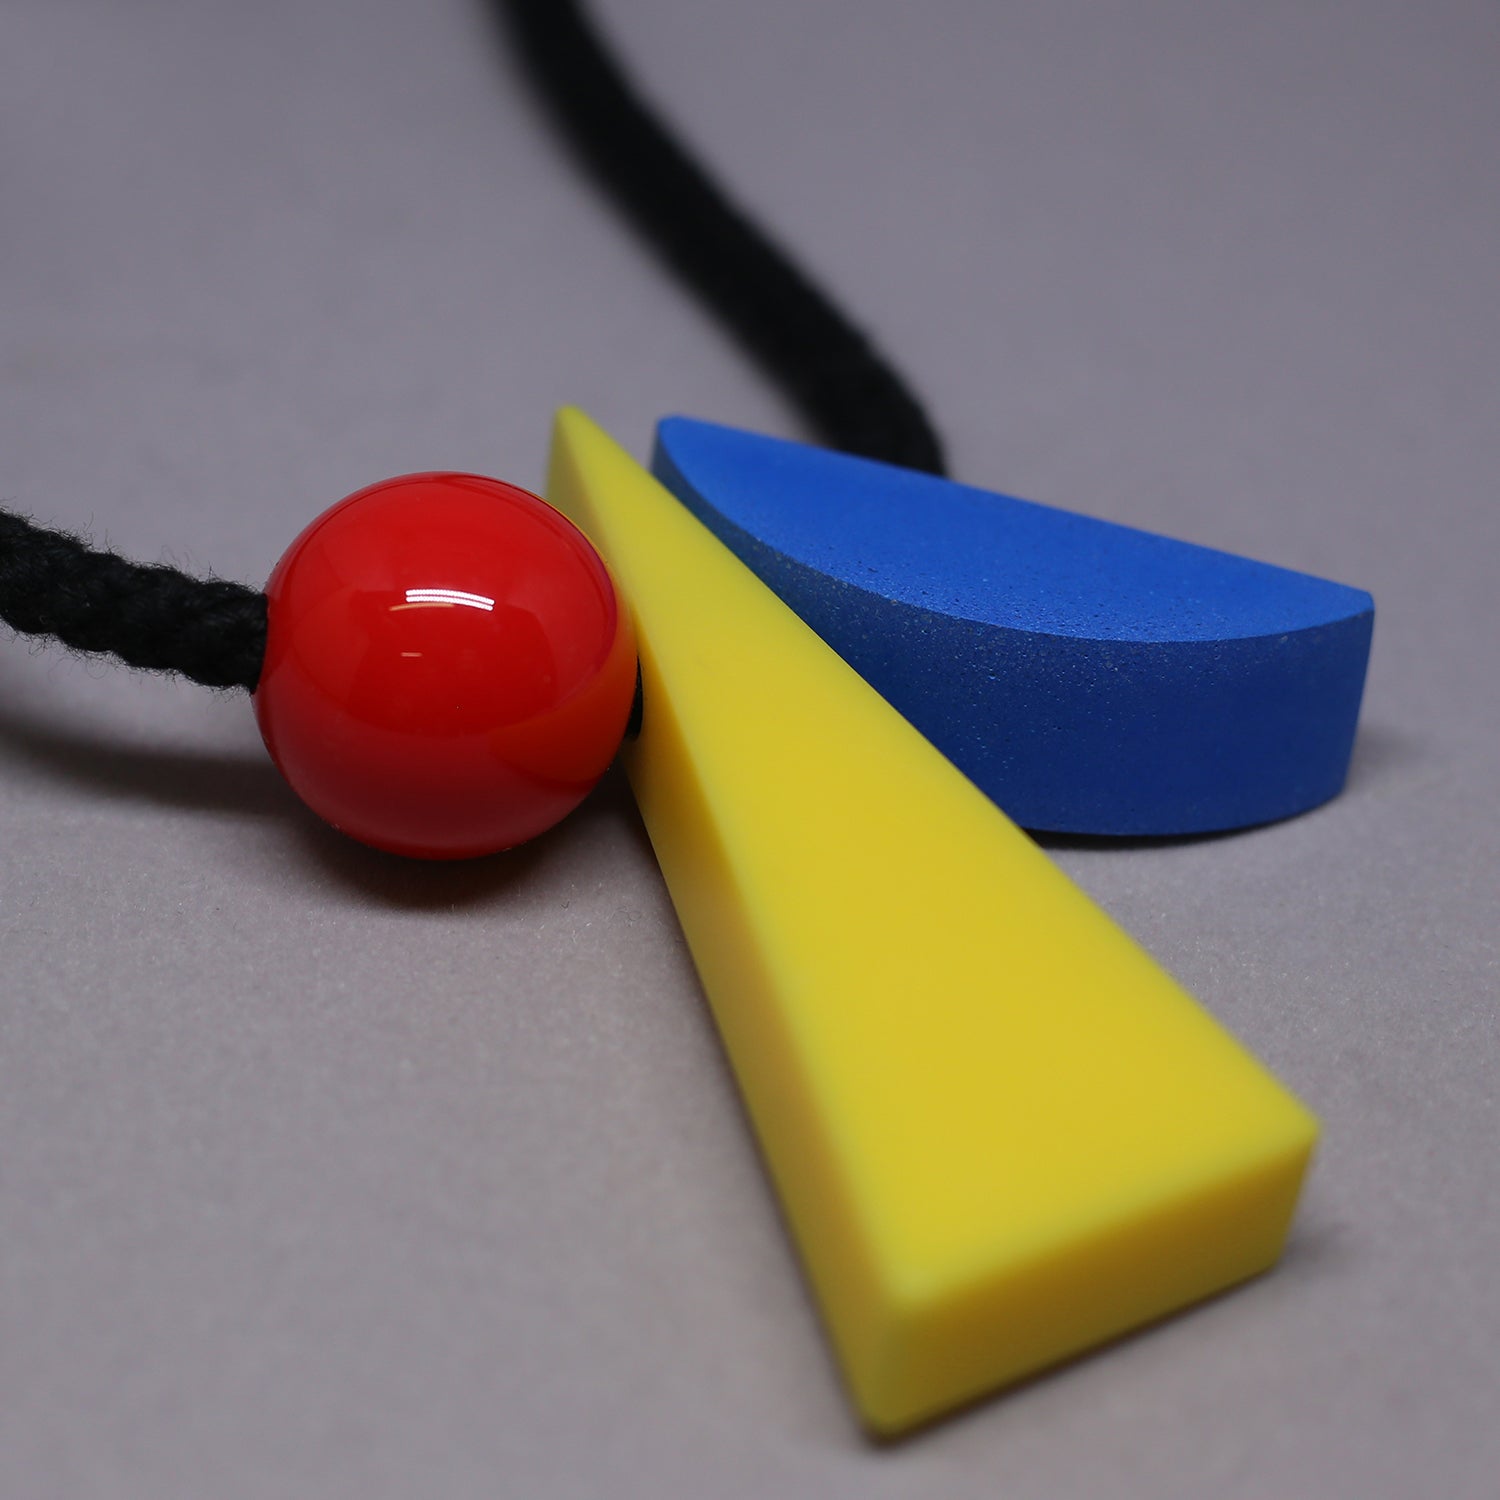 Veld necklace by One We Made Earlier. Bright, bold geometric accessory.